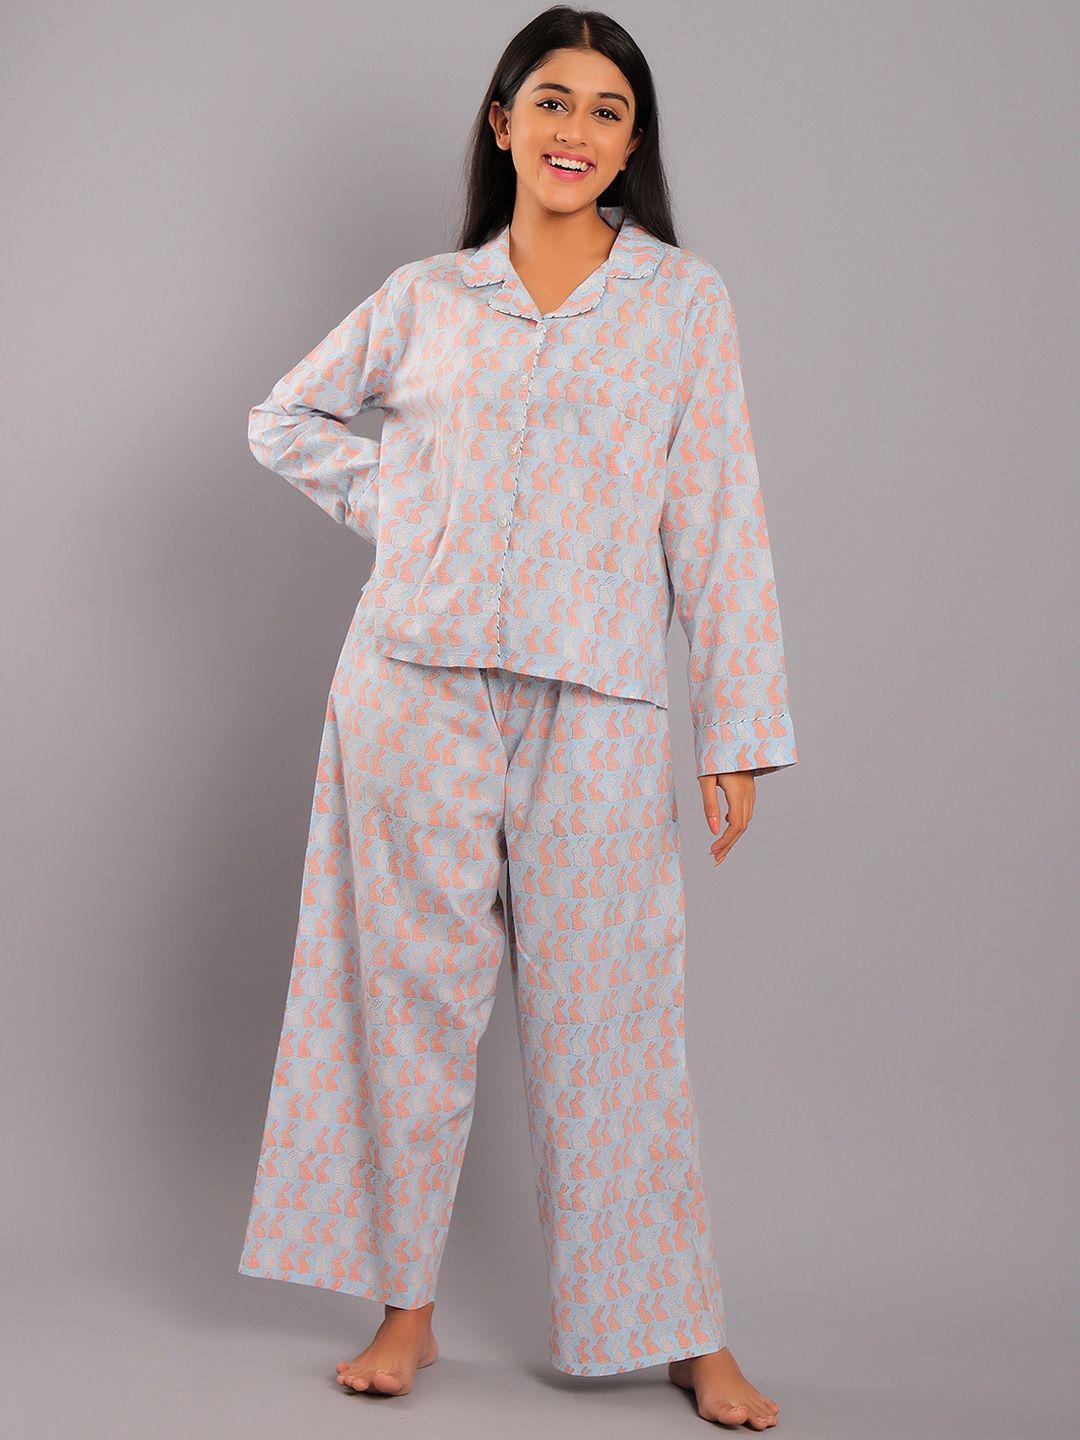 gauranche women blue printed pure cotton night suit